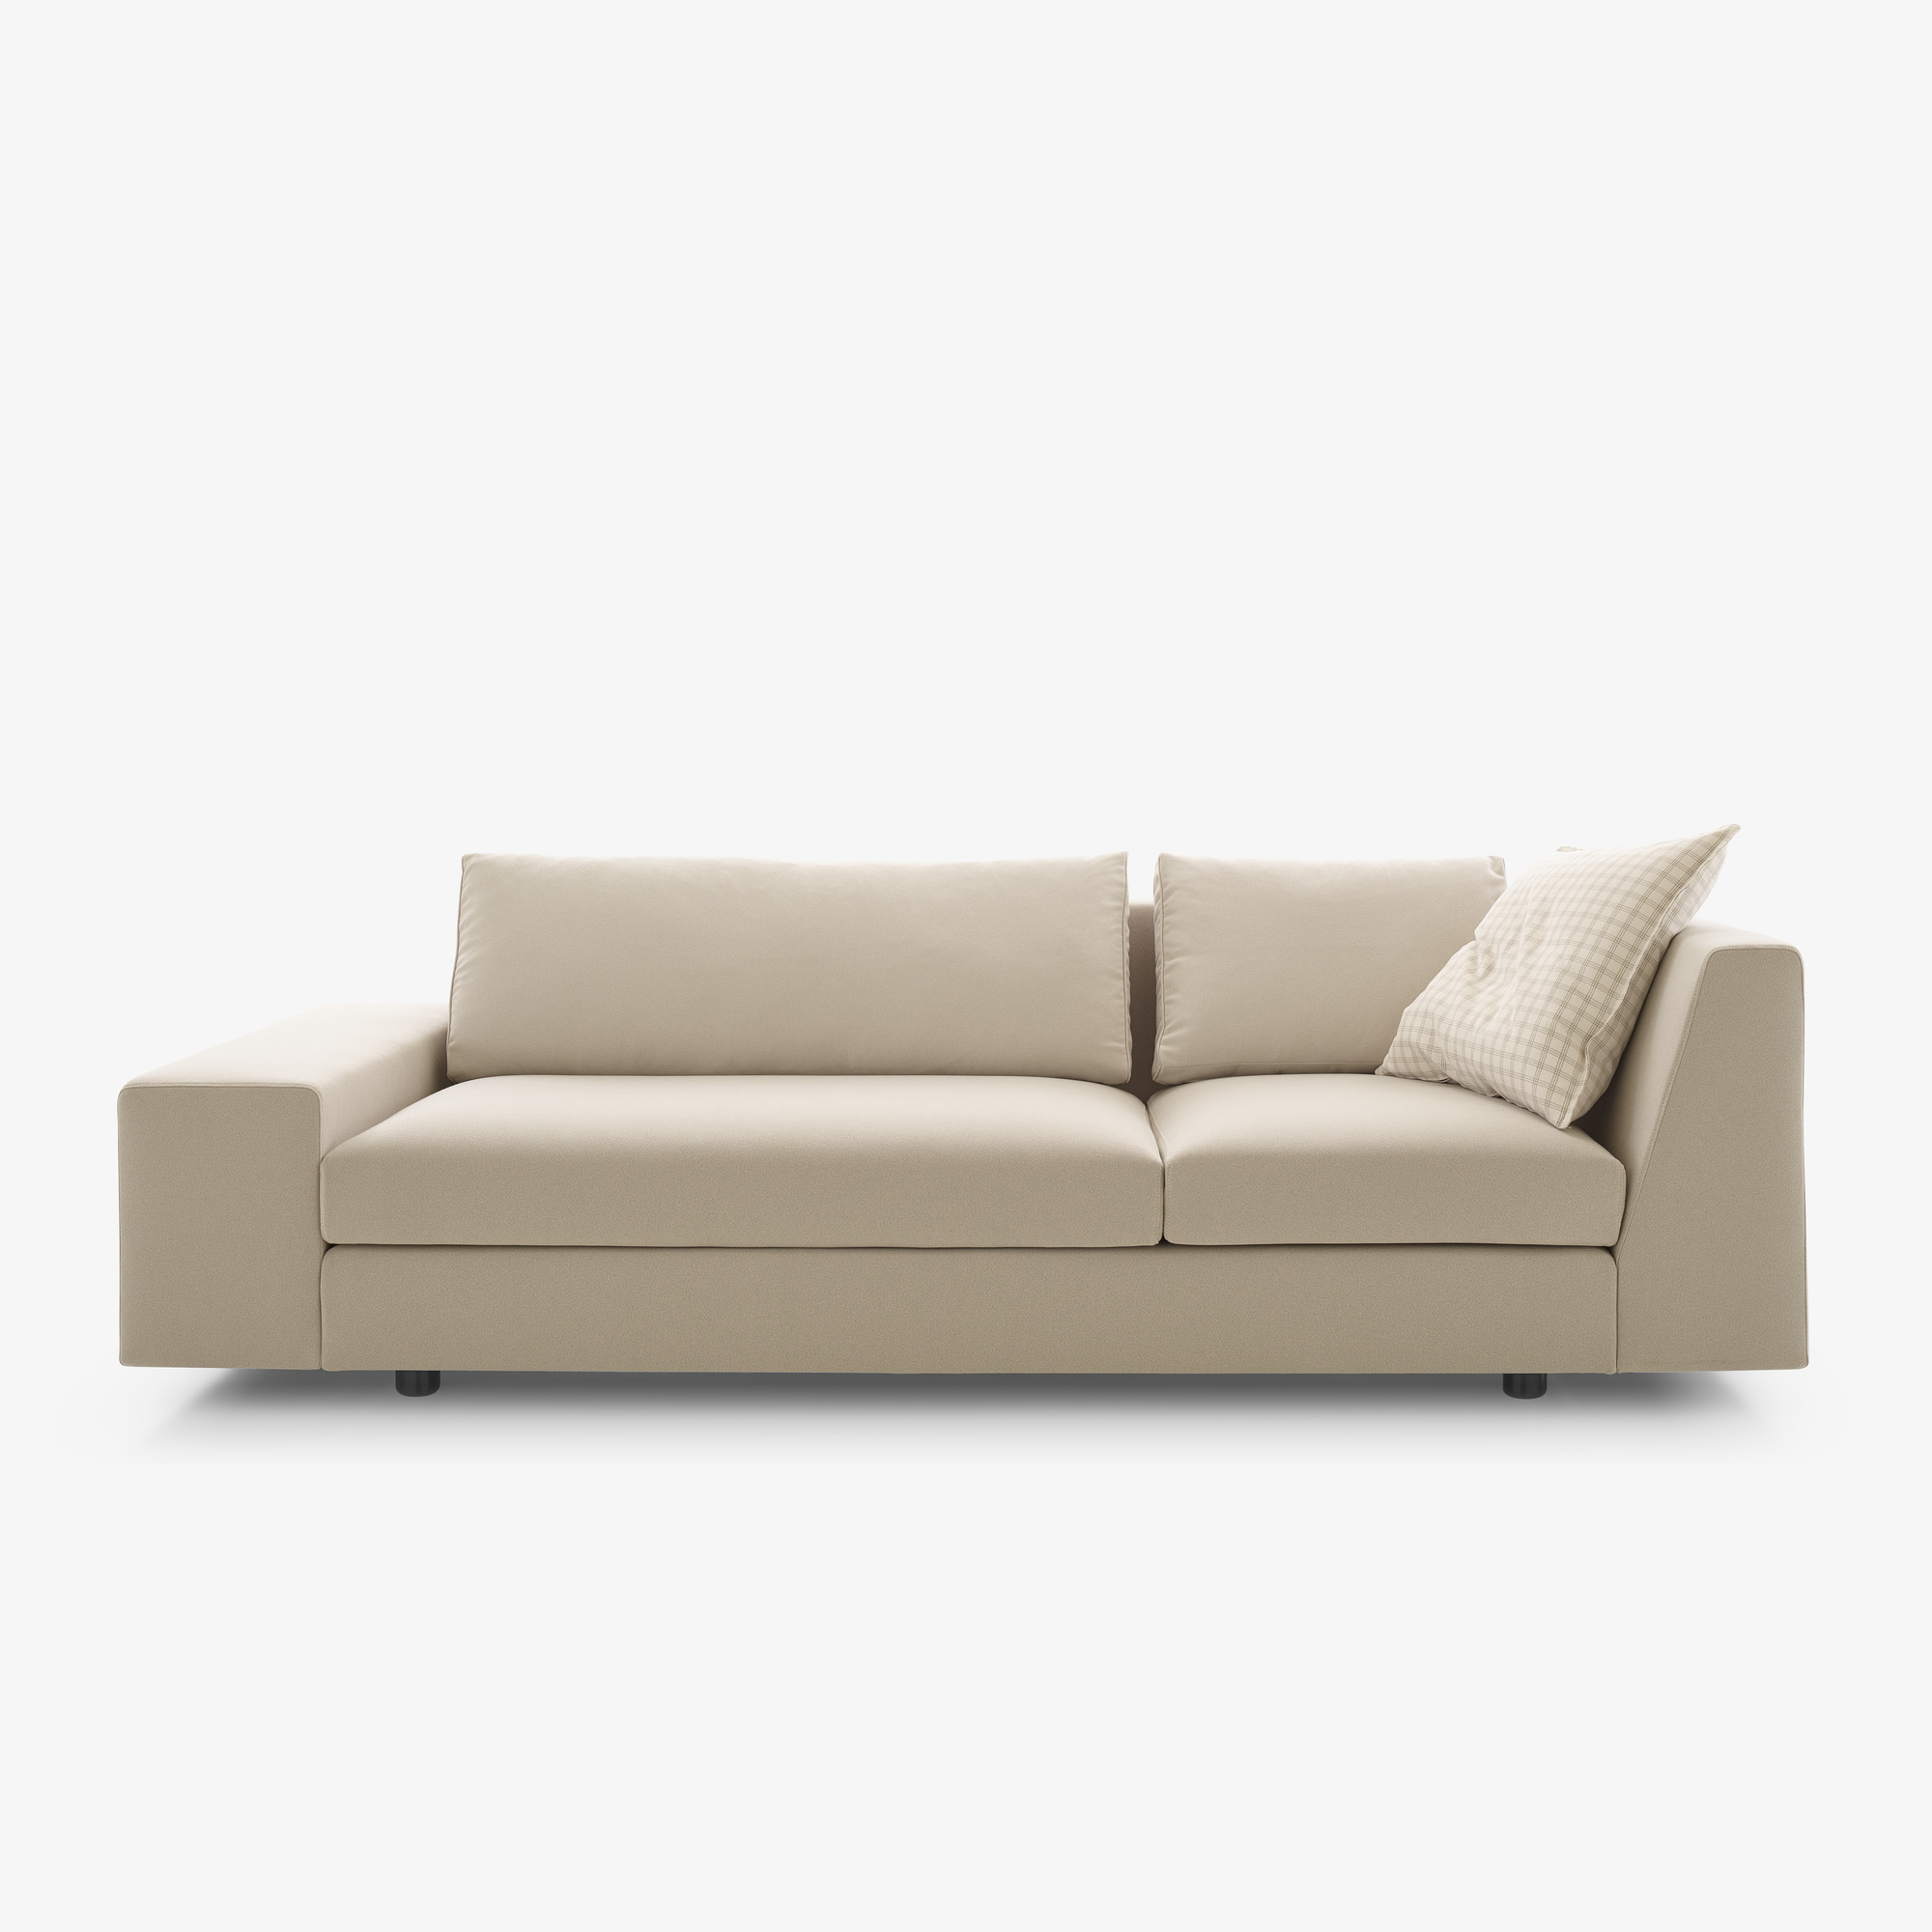 Image LARGE ASYMMETRICAL SETTEE COMPLETE ITEM